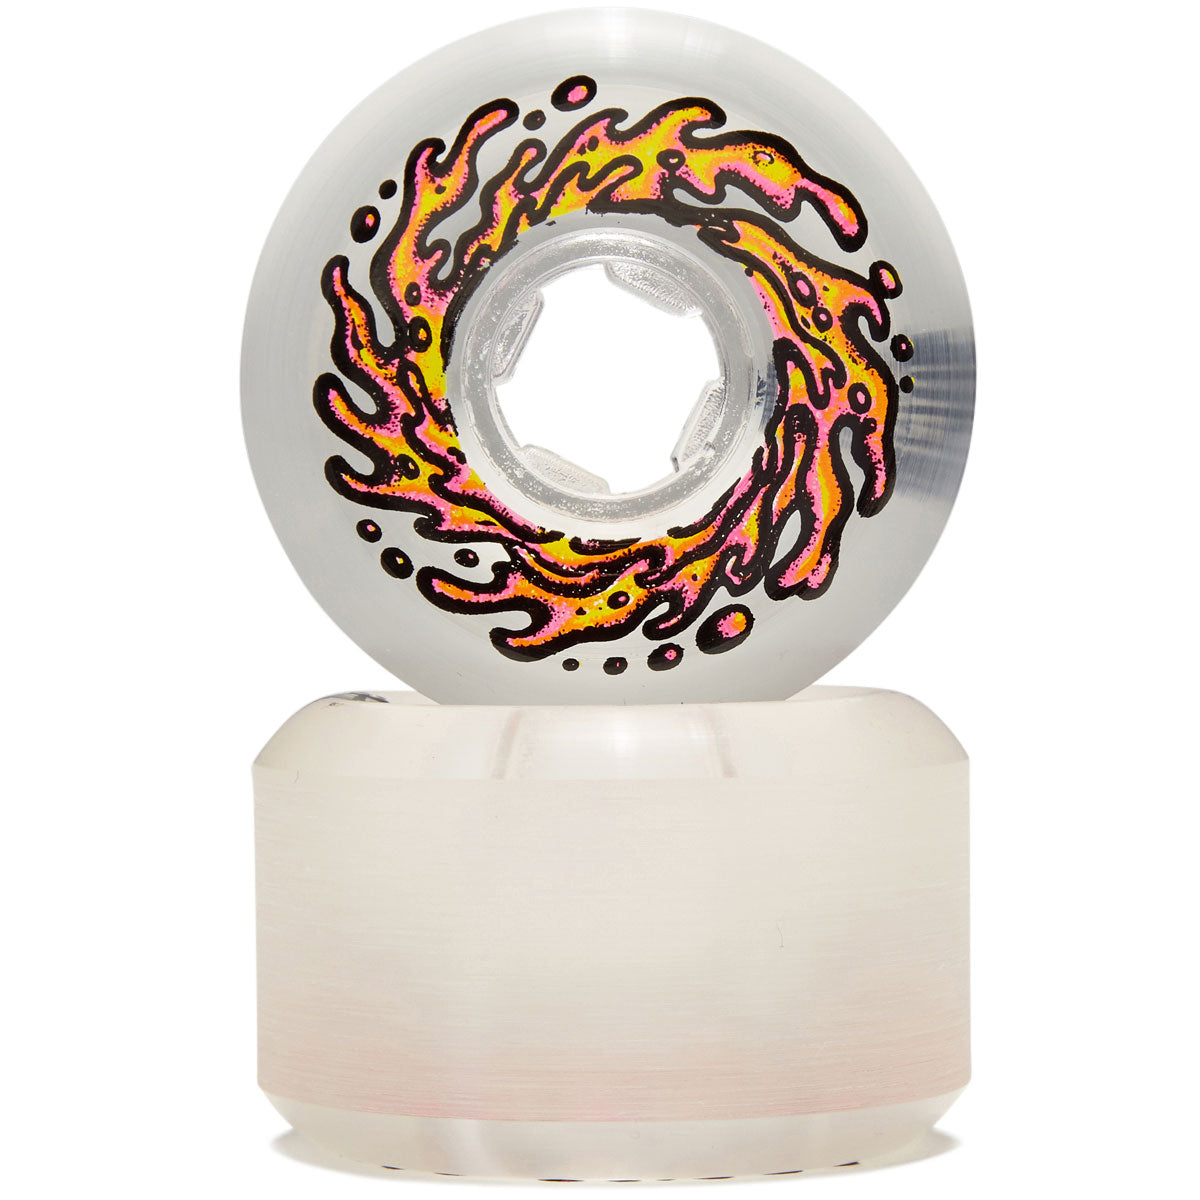 Slime Balls Mirror Vomits 99a Skateboard Wheels - Clear - 54mm image 2